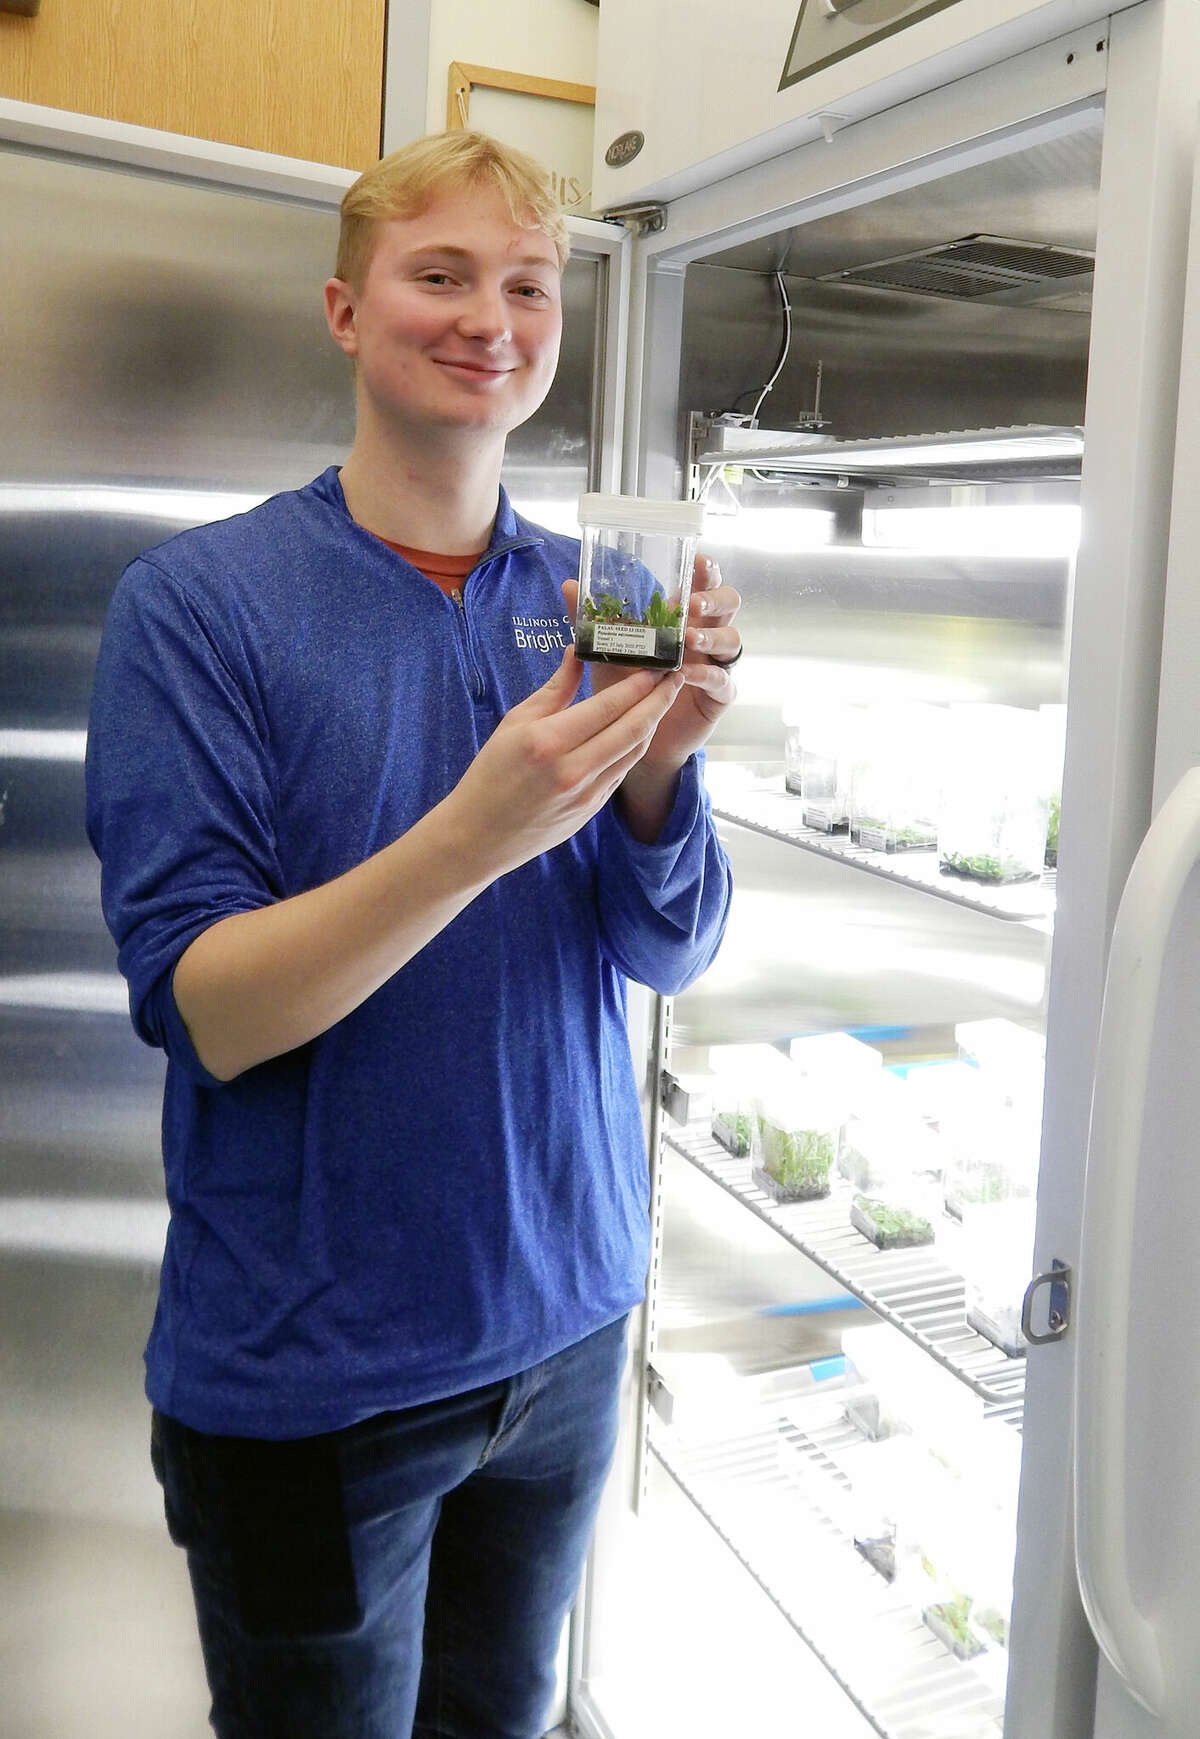 Illinois College senior Charles Veith of Jacksonville shows off some of the orchid seedlings he's grown during his time at the school. Veith is in the Republic of Palau this week as part of Smithsonian Global's Palau Orchid Conservation Initiative.